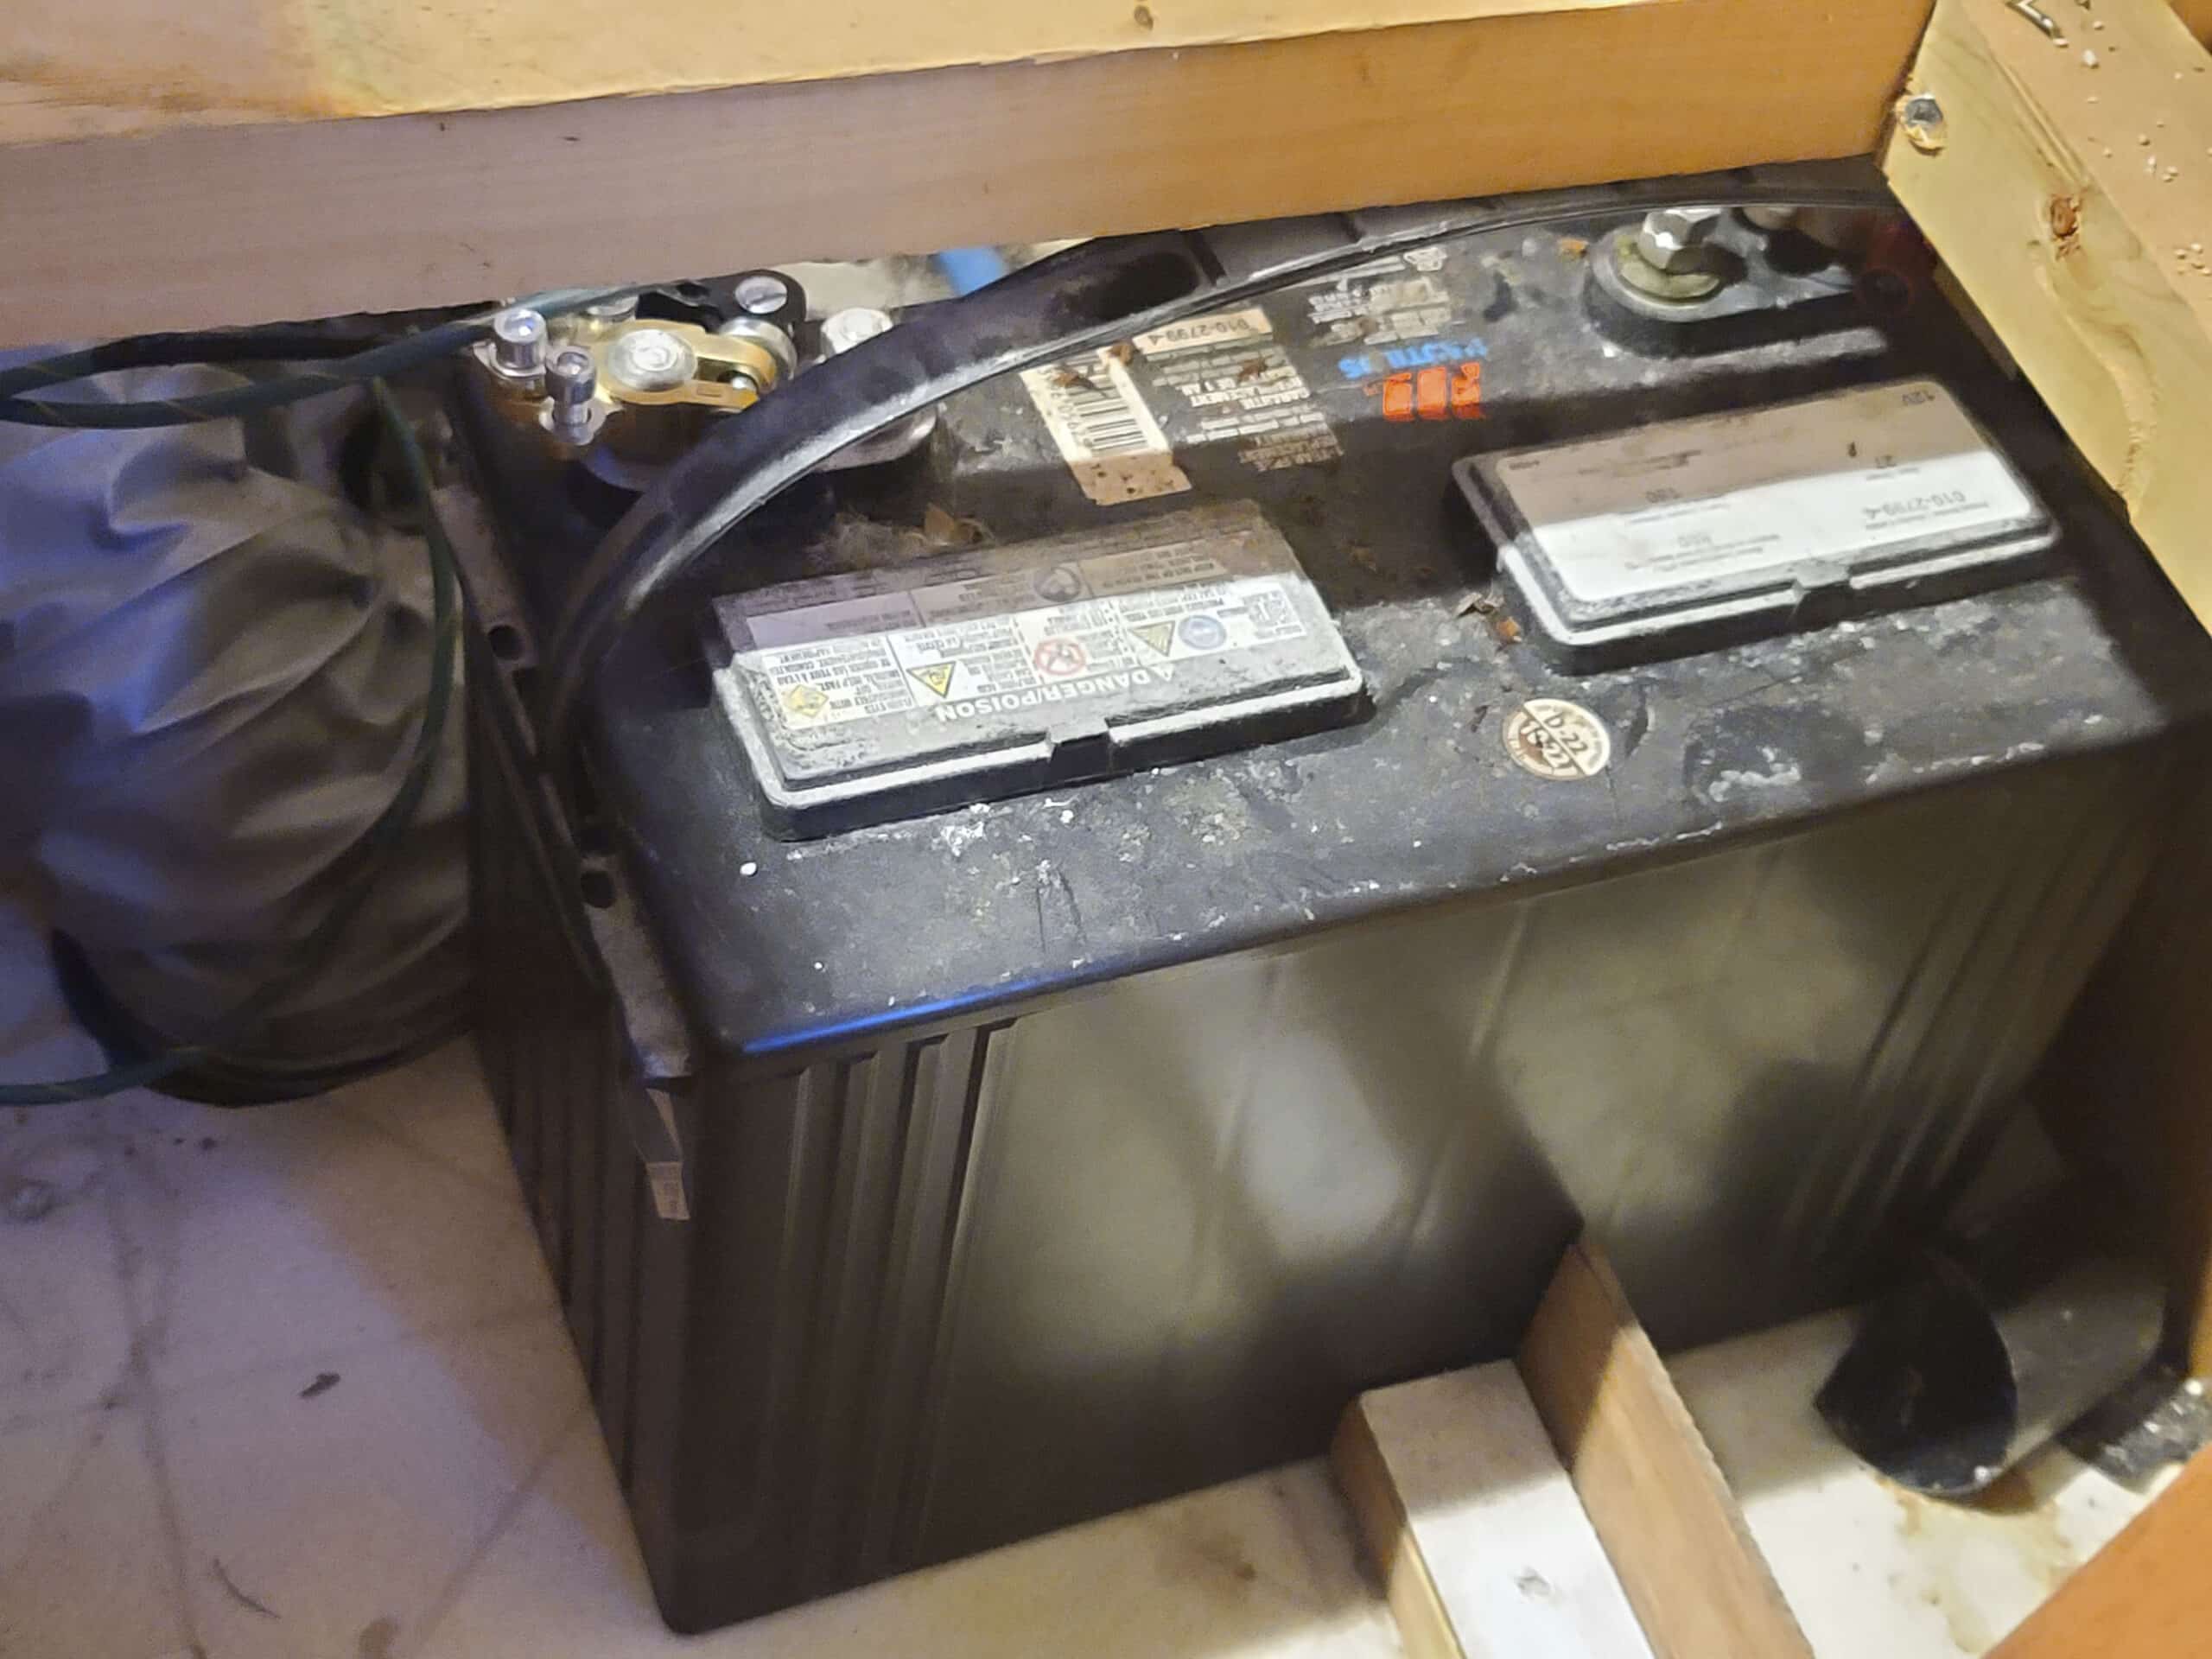 A top/side view of a deep cycle RV battery, seen under the kitchen seat.